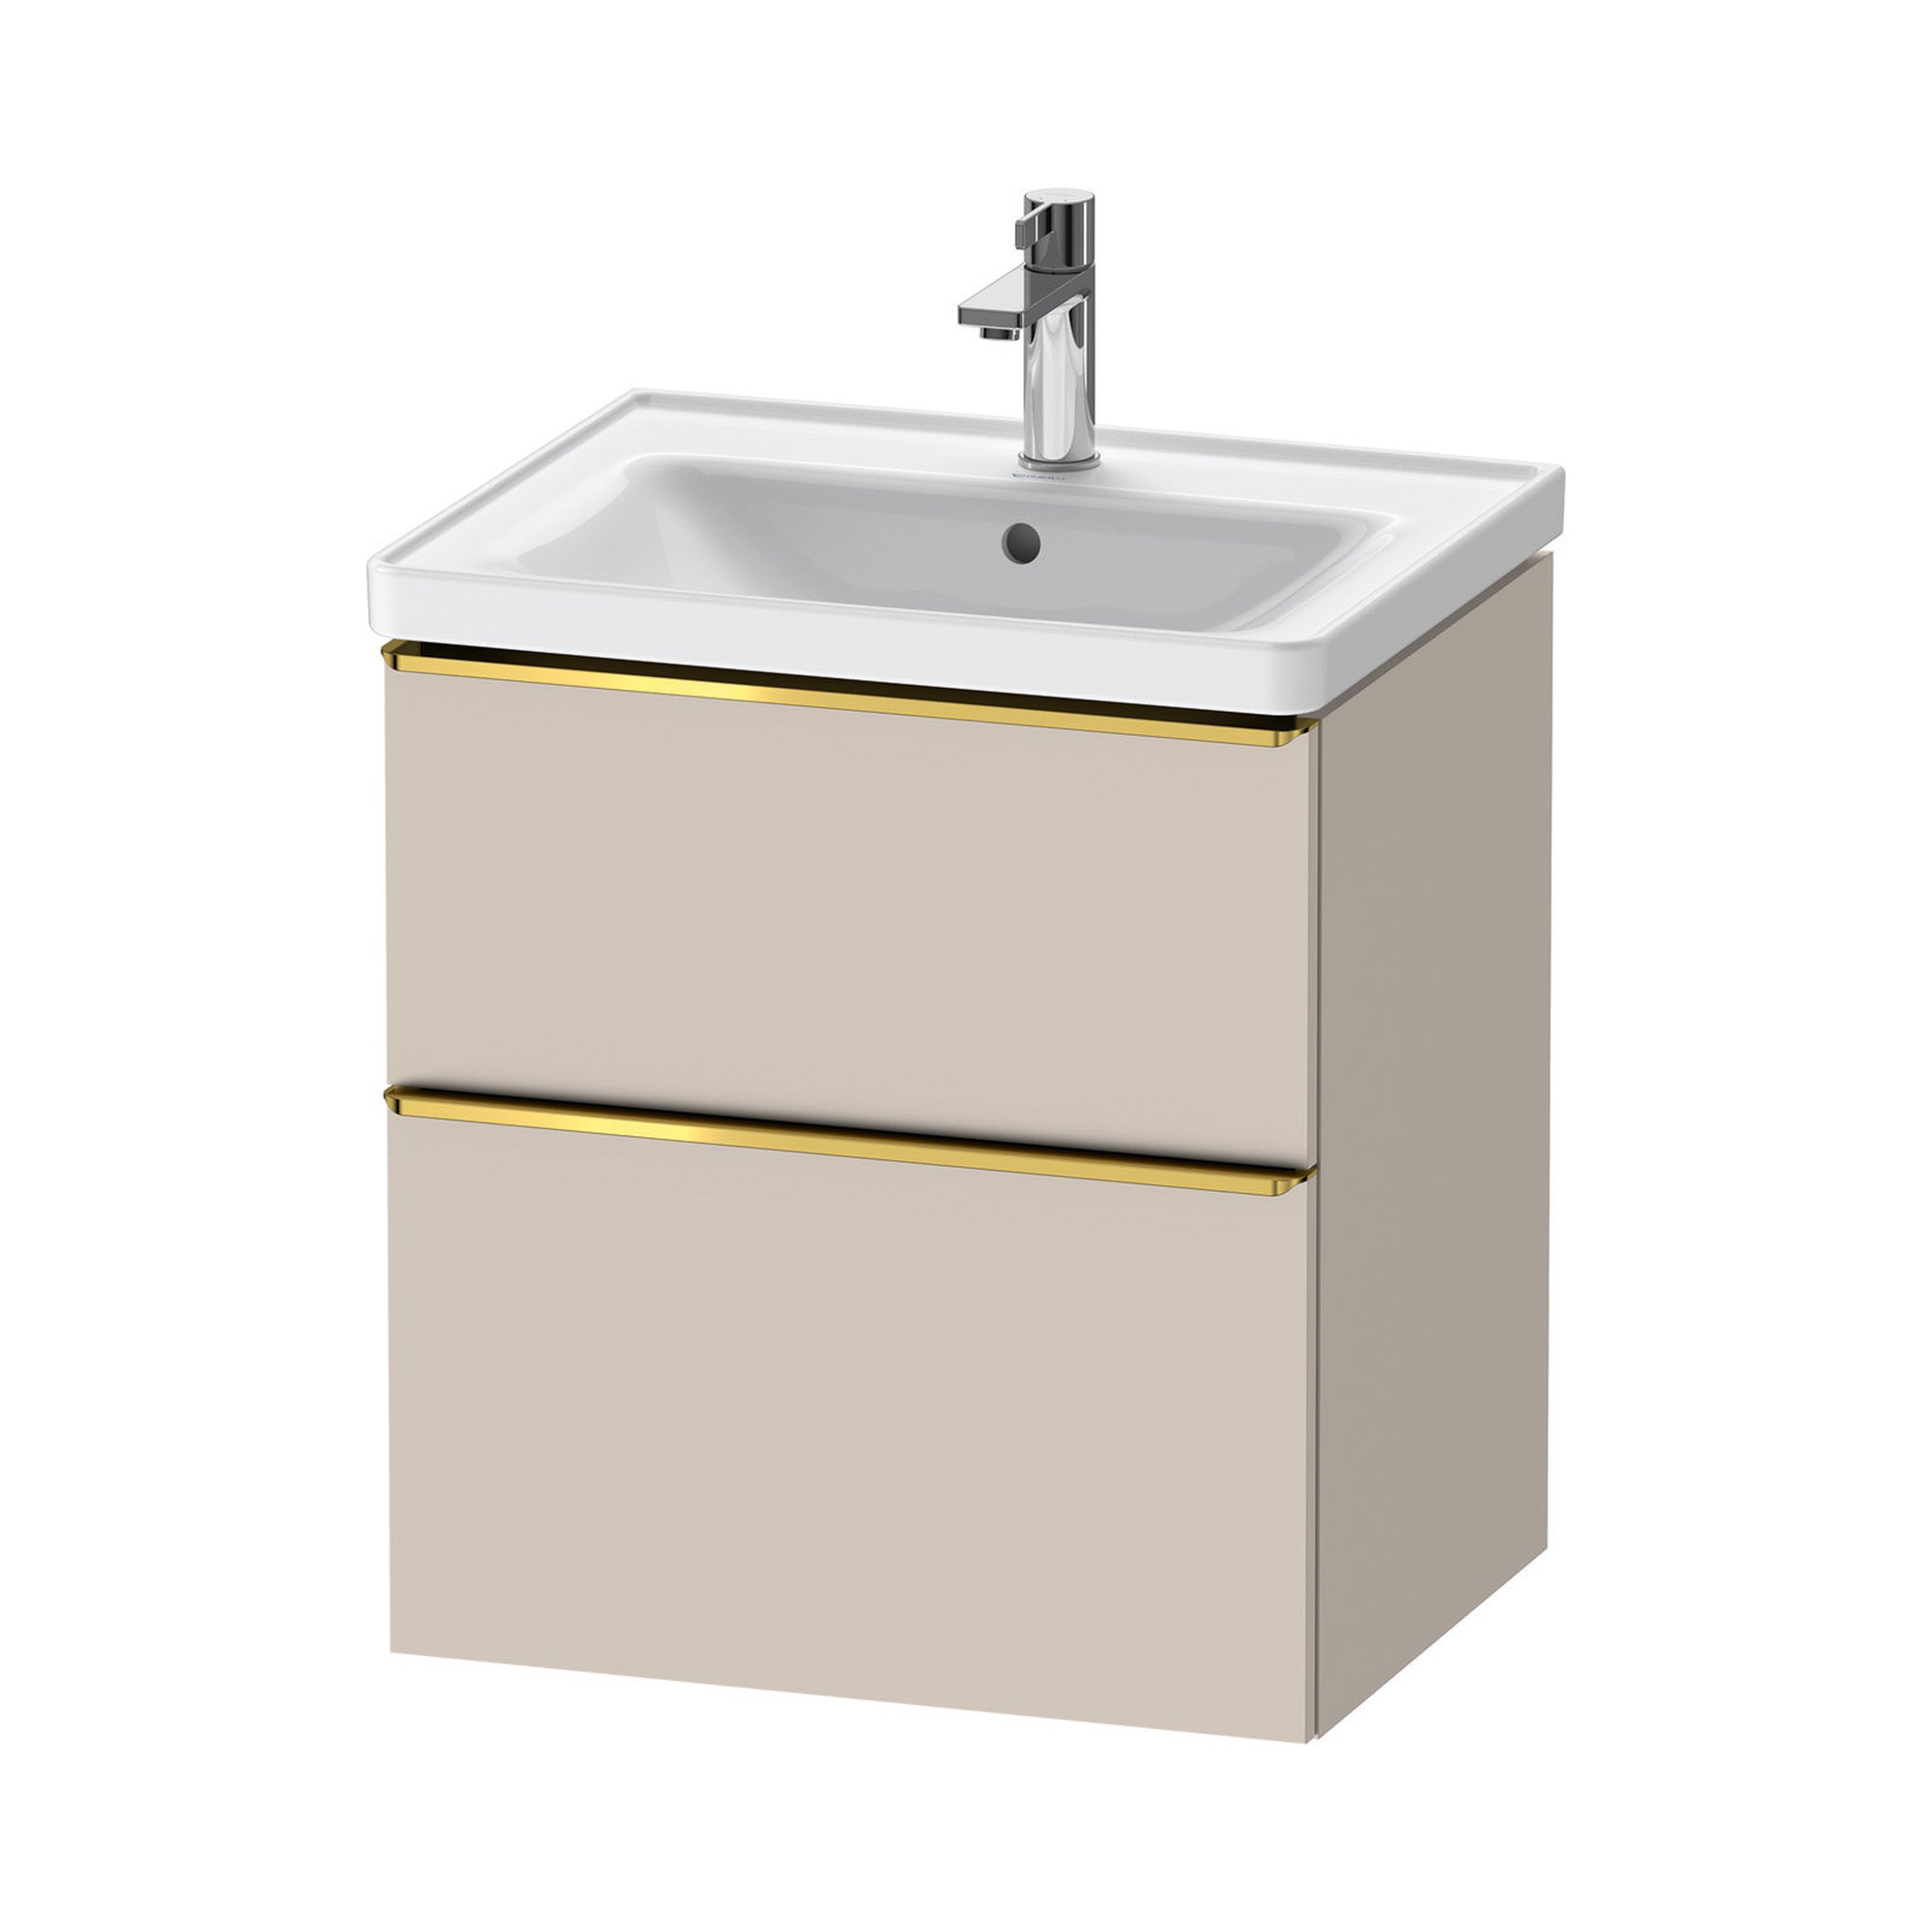 duravit d-neo 600 wall mounted vanity unit with d-neo basin taupe gold handles